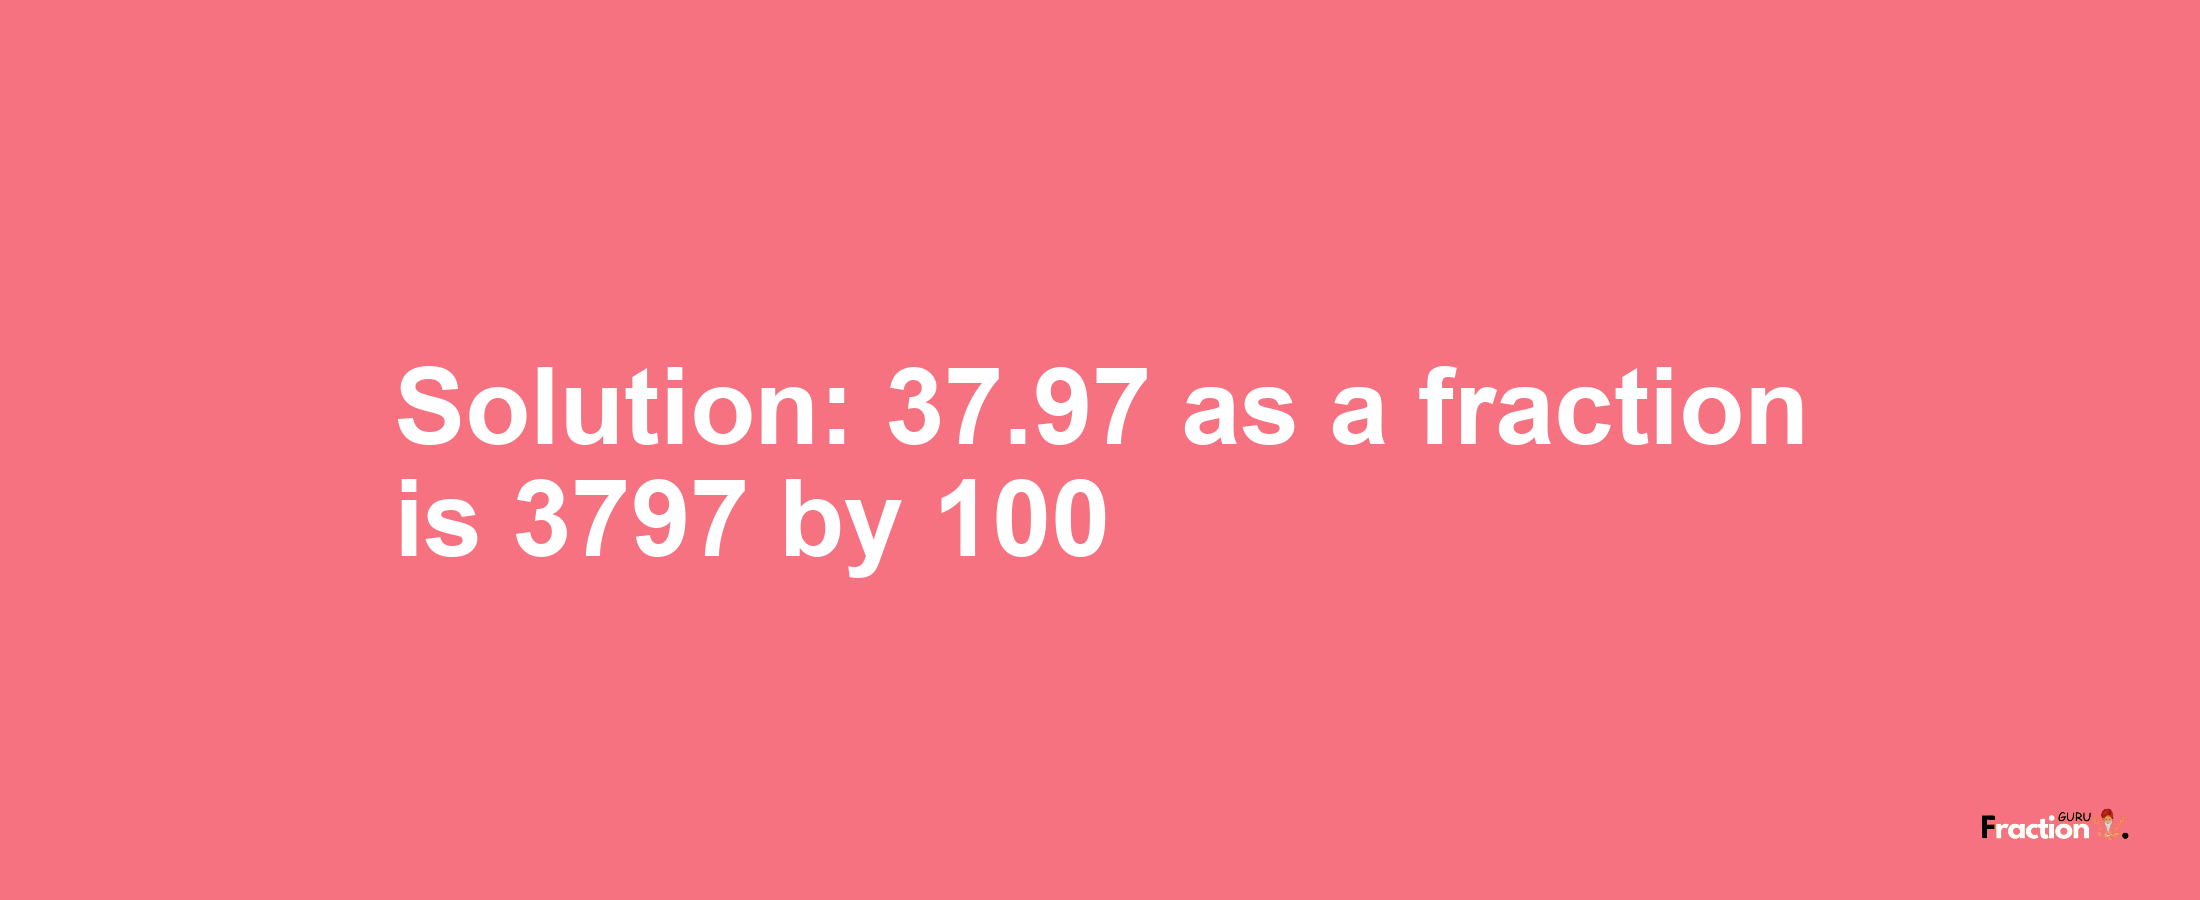 Solution:37.97 as a fraction is 3797/100